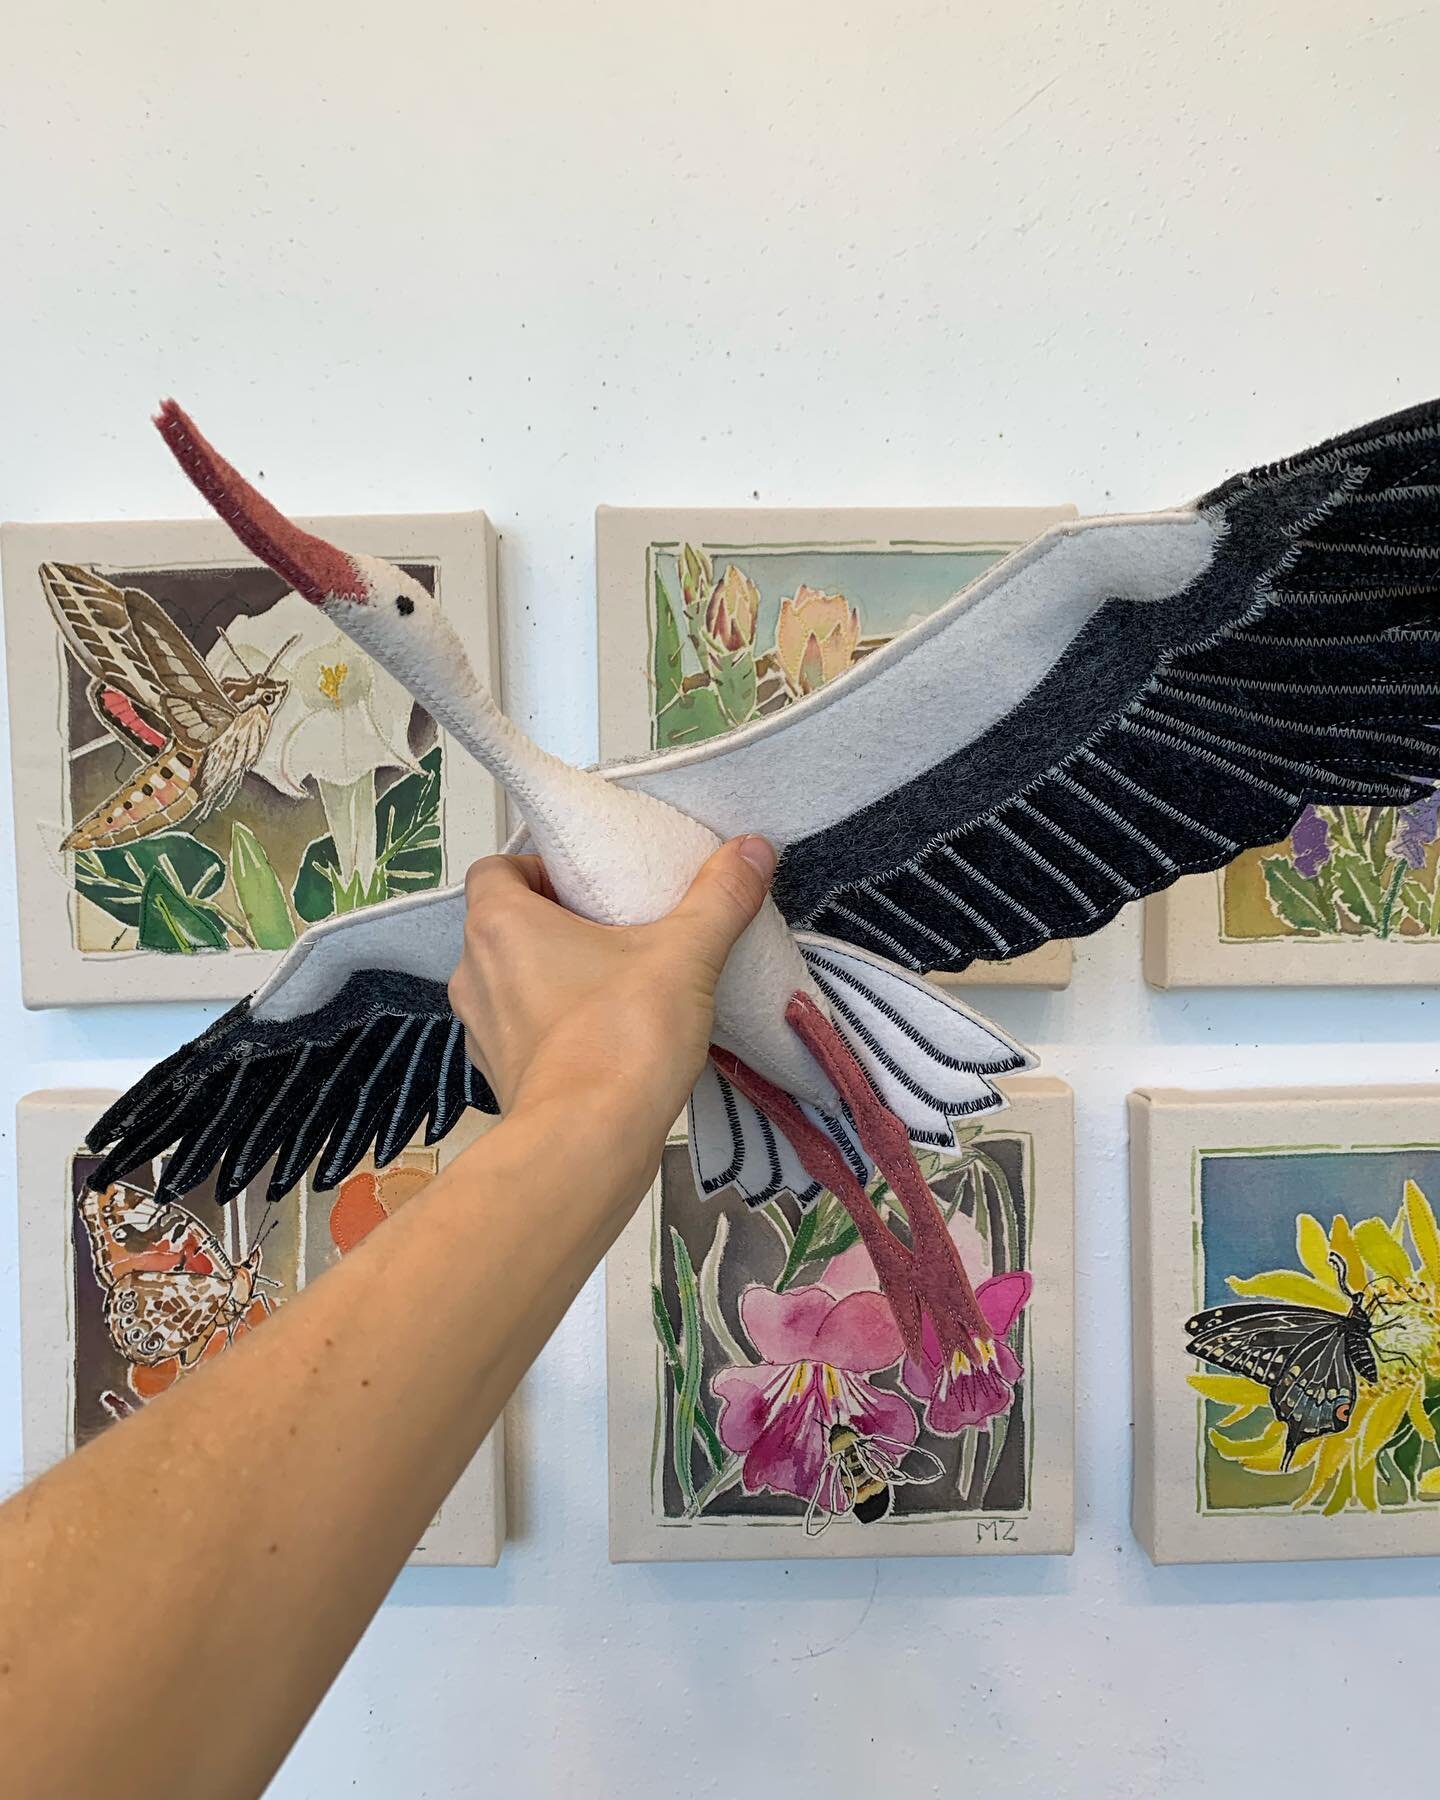 Felt white stork for baby mobile in front of artworks for my upcoming show &ldquo;where the flowers sing&rdquo; @howyoureside in #santafenewmexico opening Friday, May 19th, 4-7pm